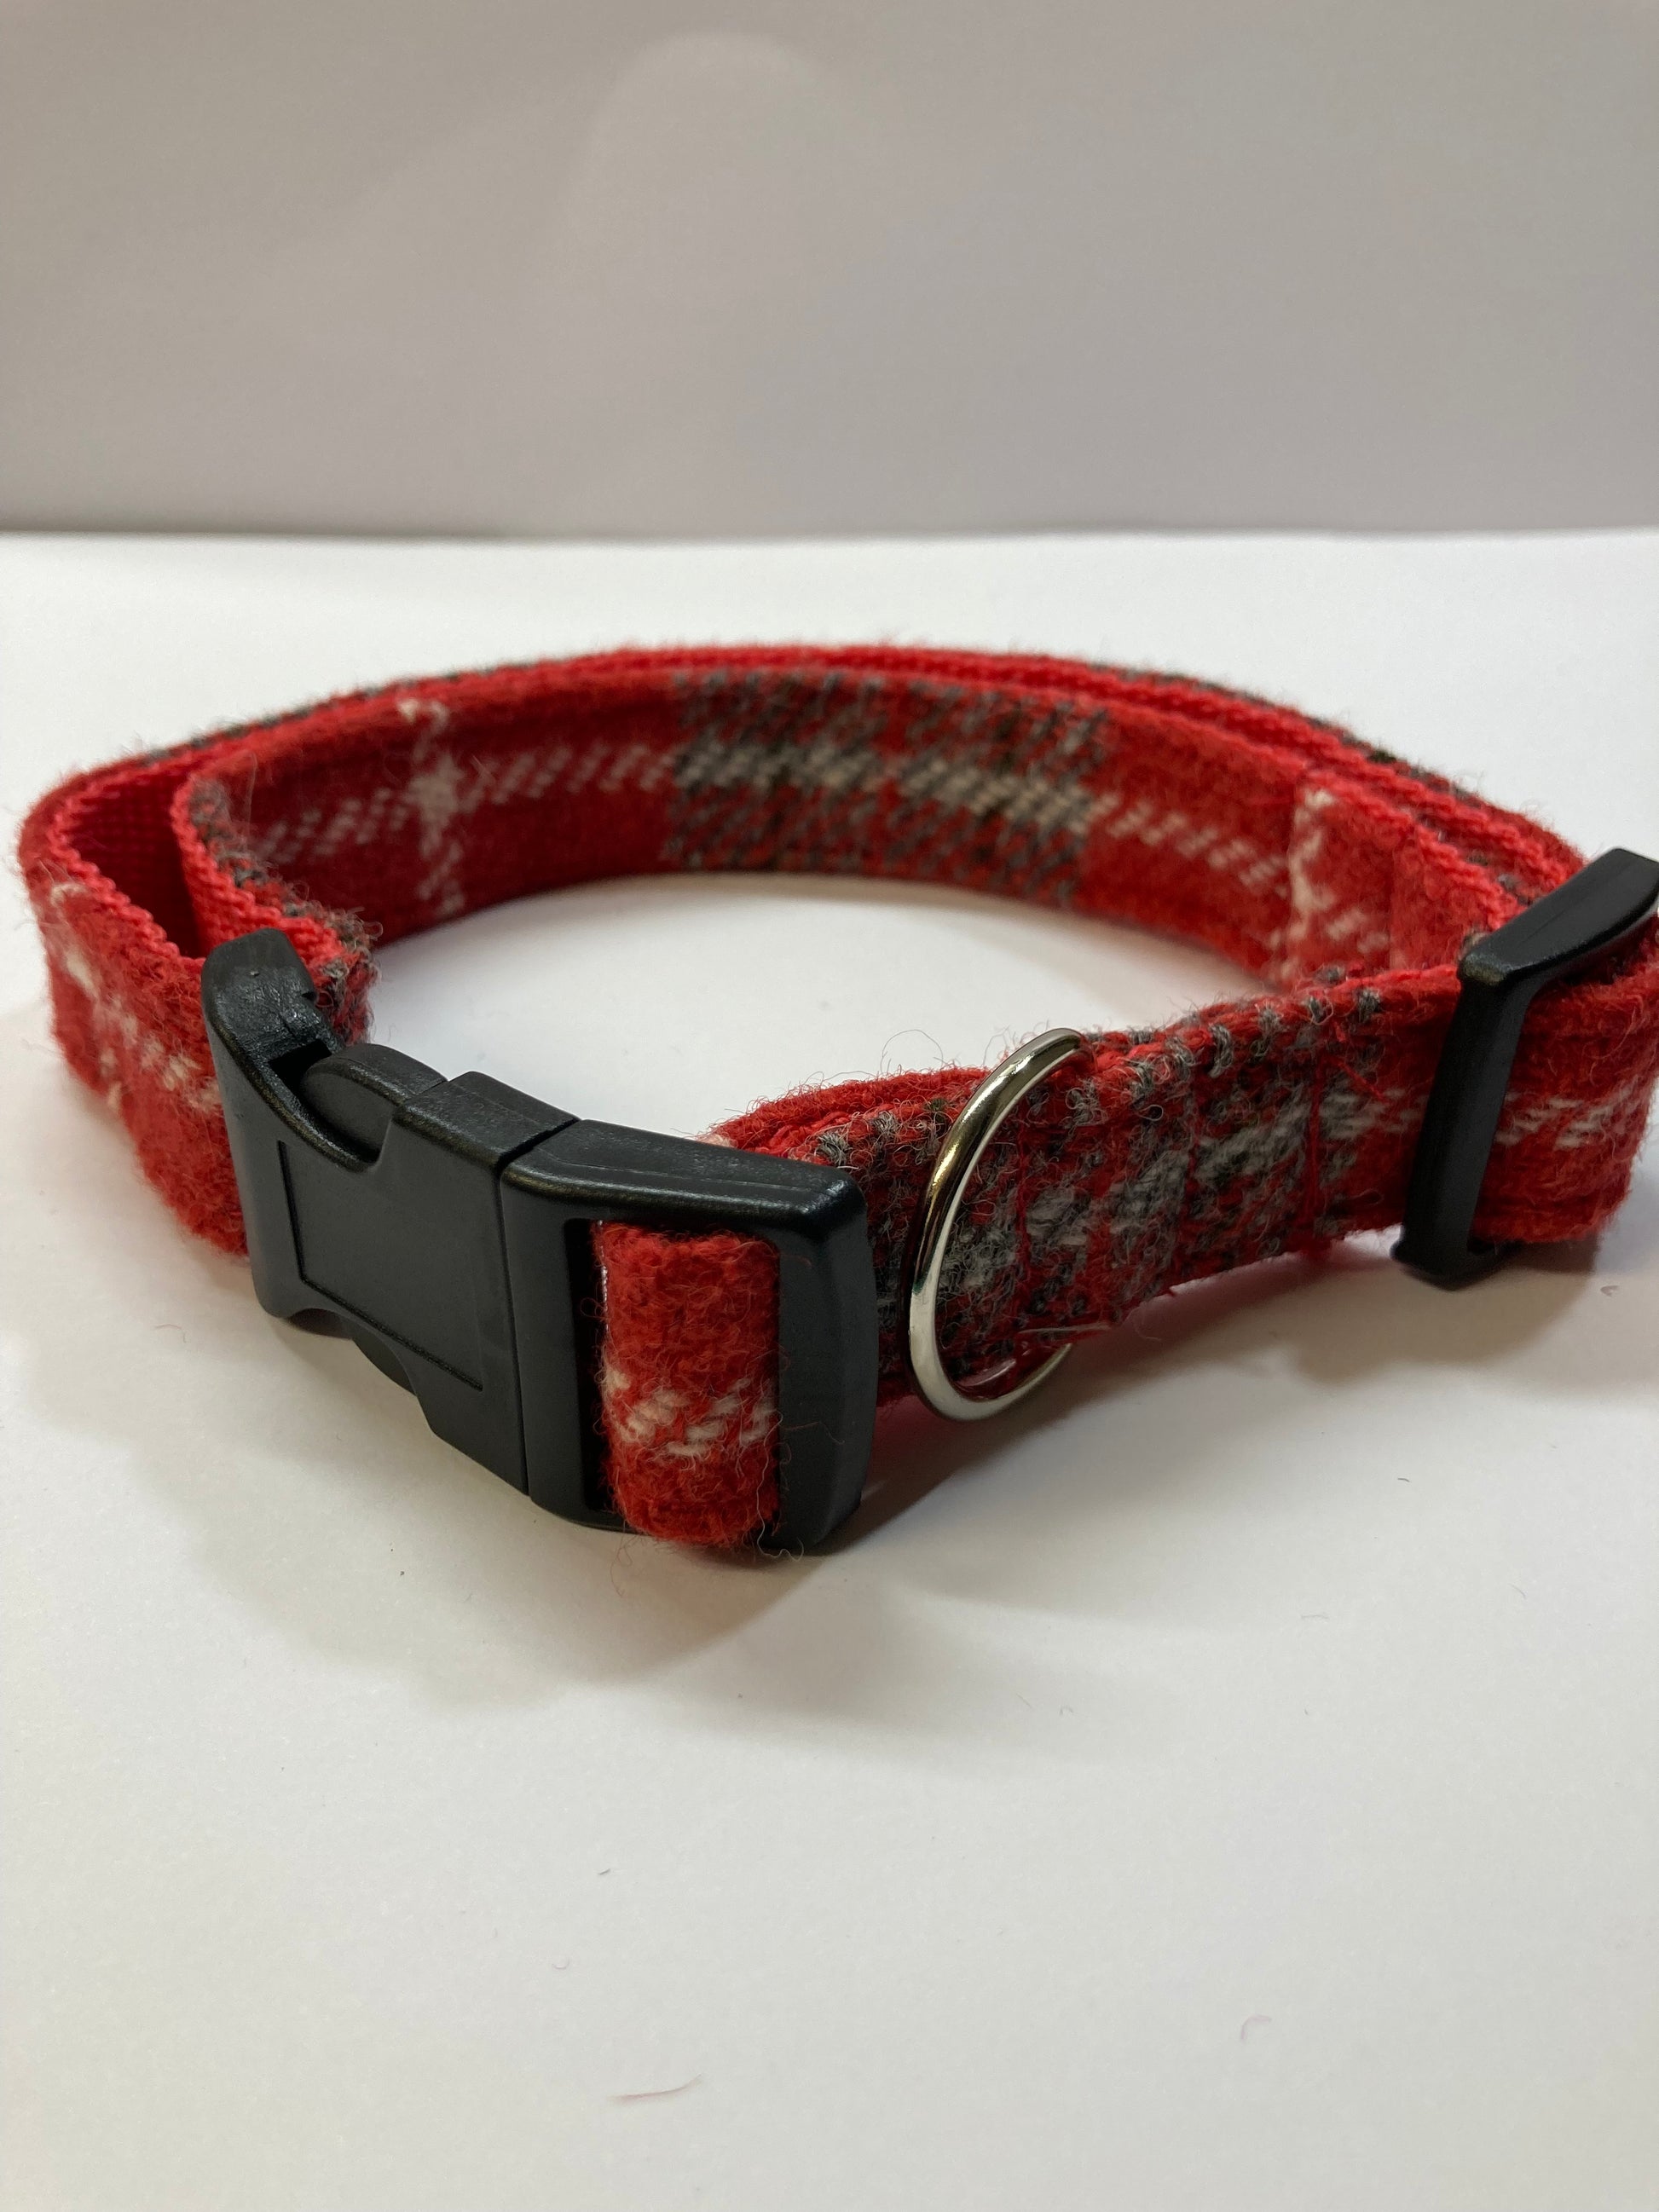 Harris Tweed Dog Collar Red check Front view